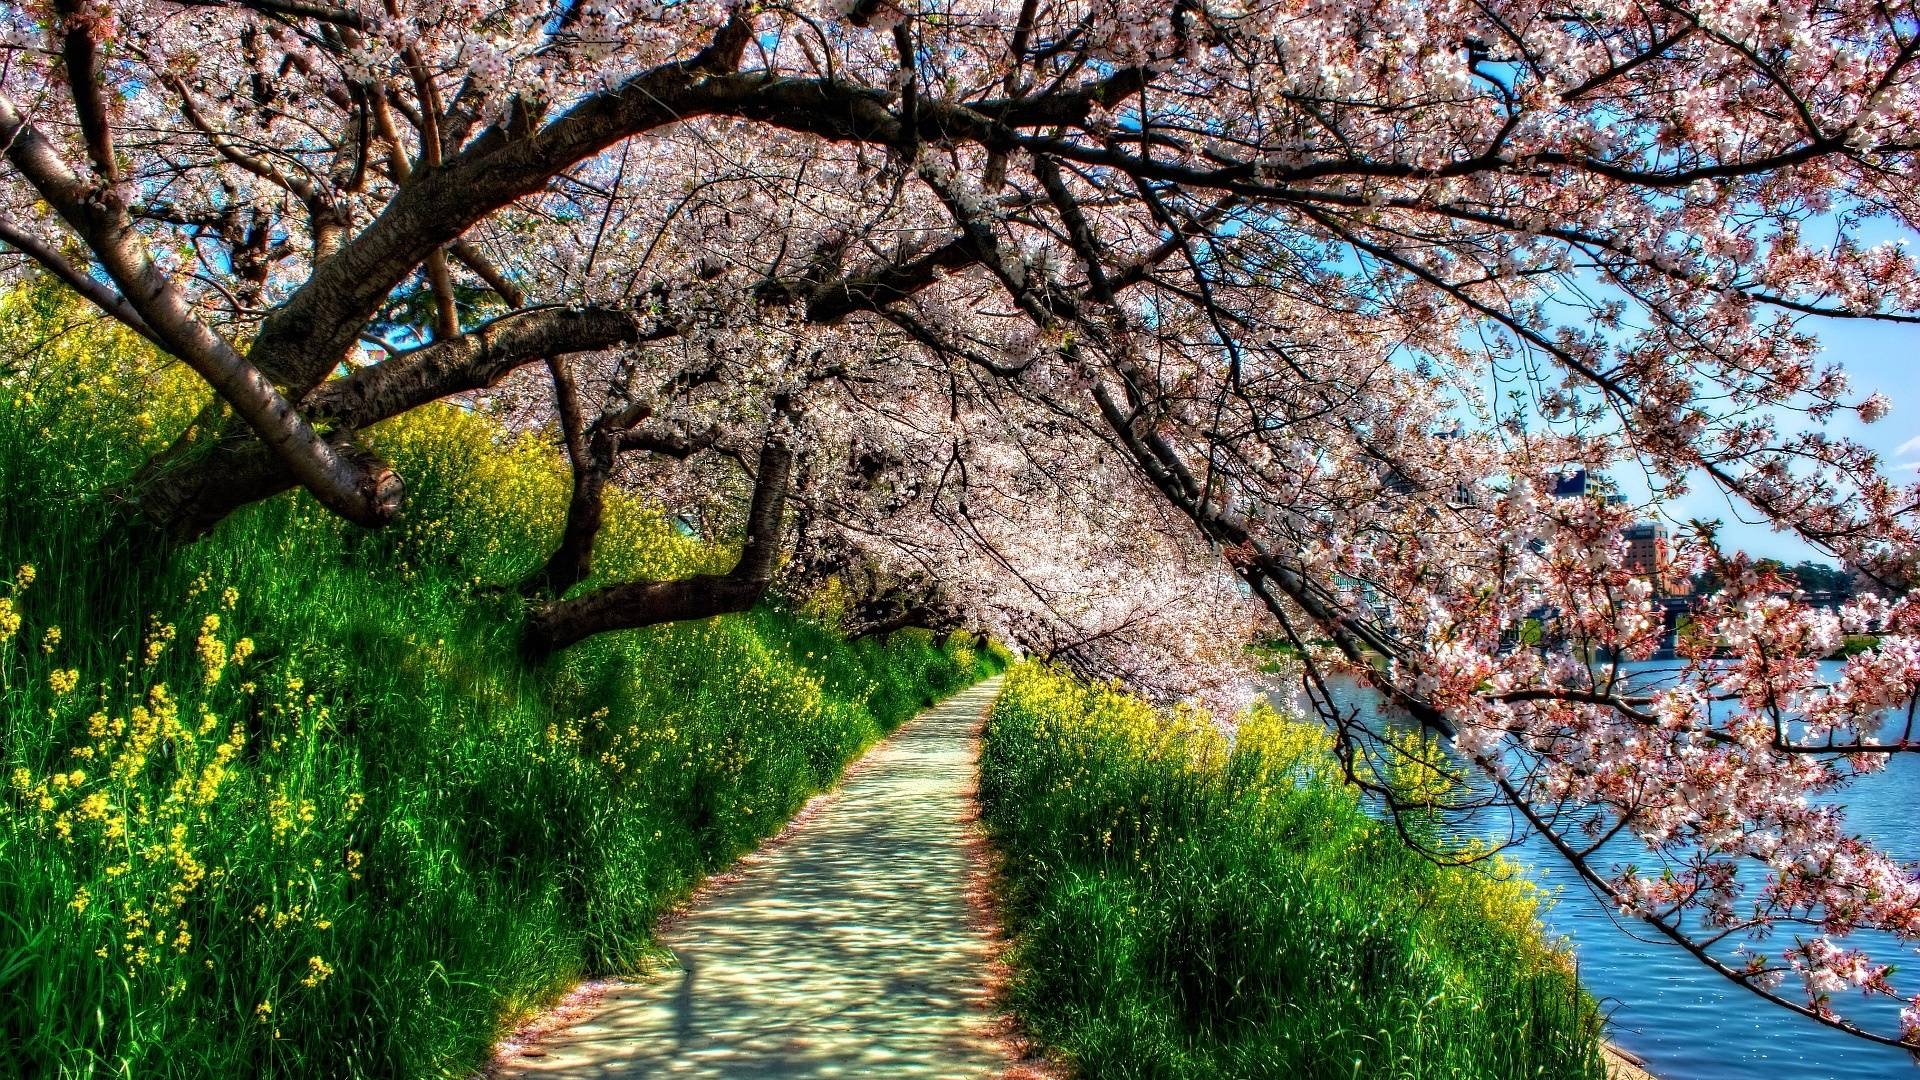 10 Top Spring Hd Wallpaper 1920X1080 FULL HD 1920×1080 For PC Background